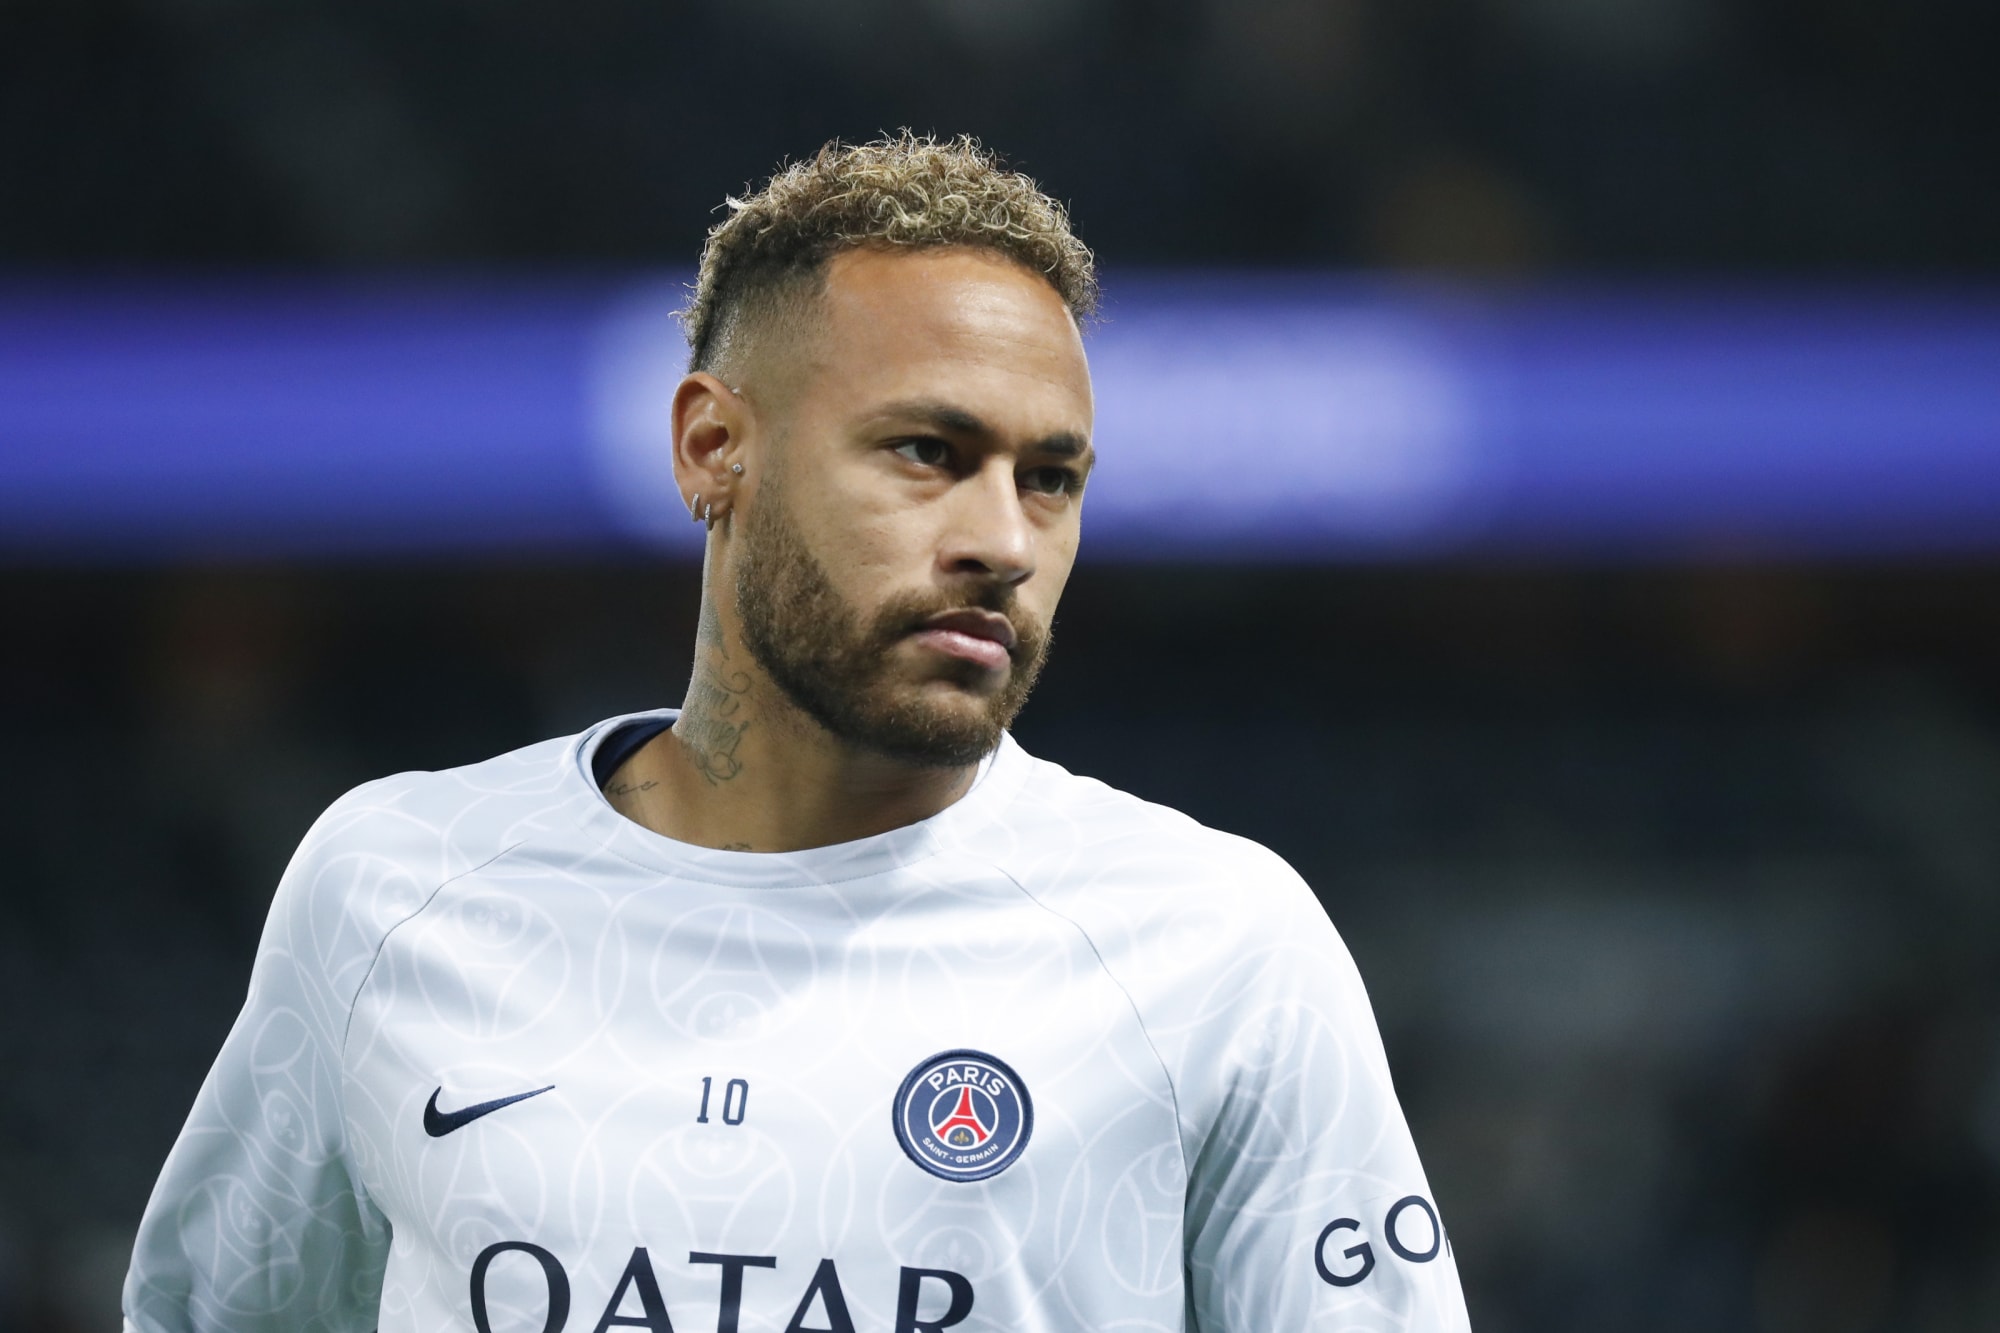 I would not be at the top level if I were not serious' - Neymar